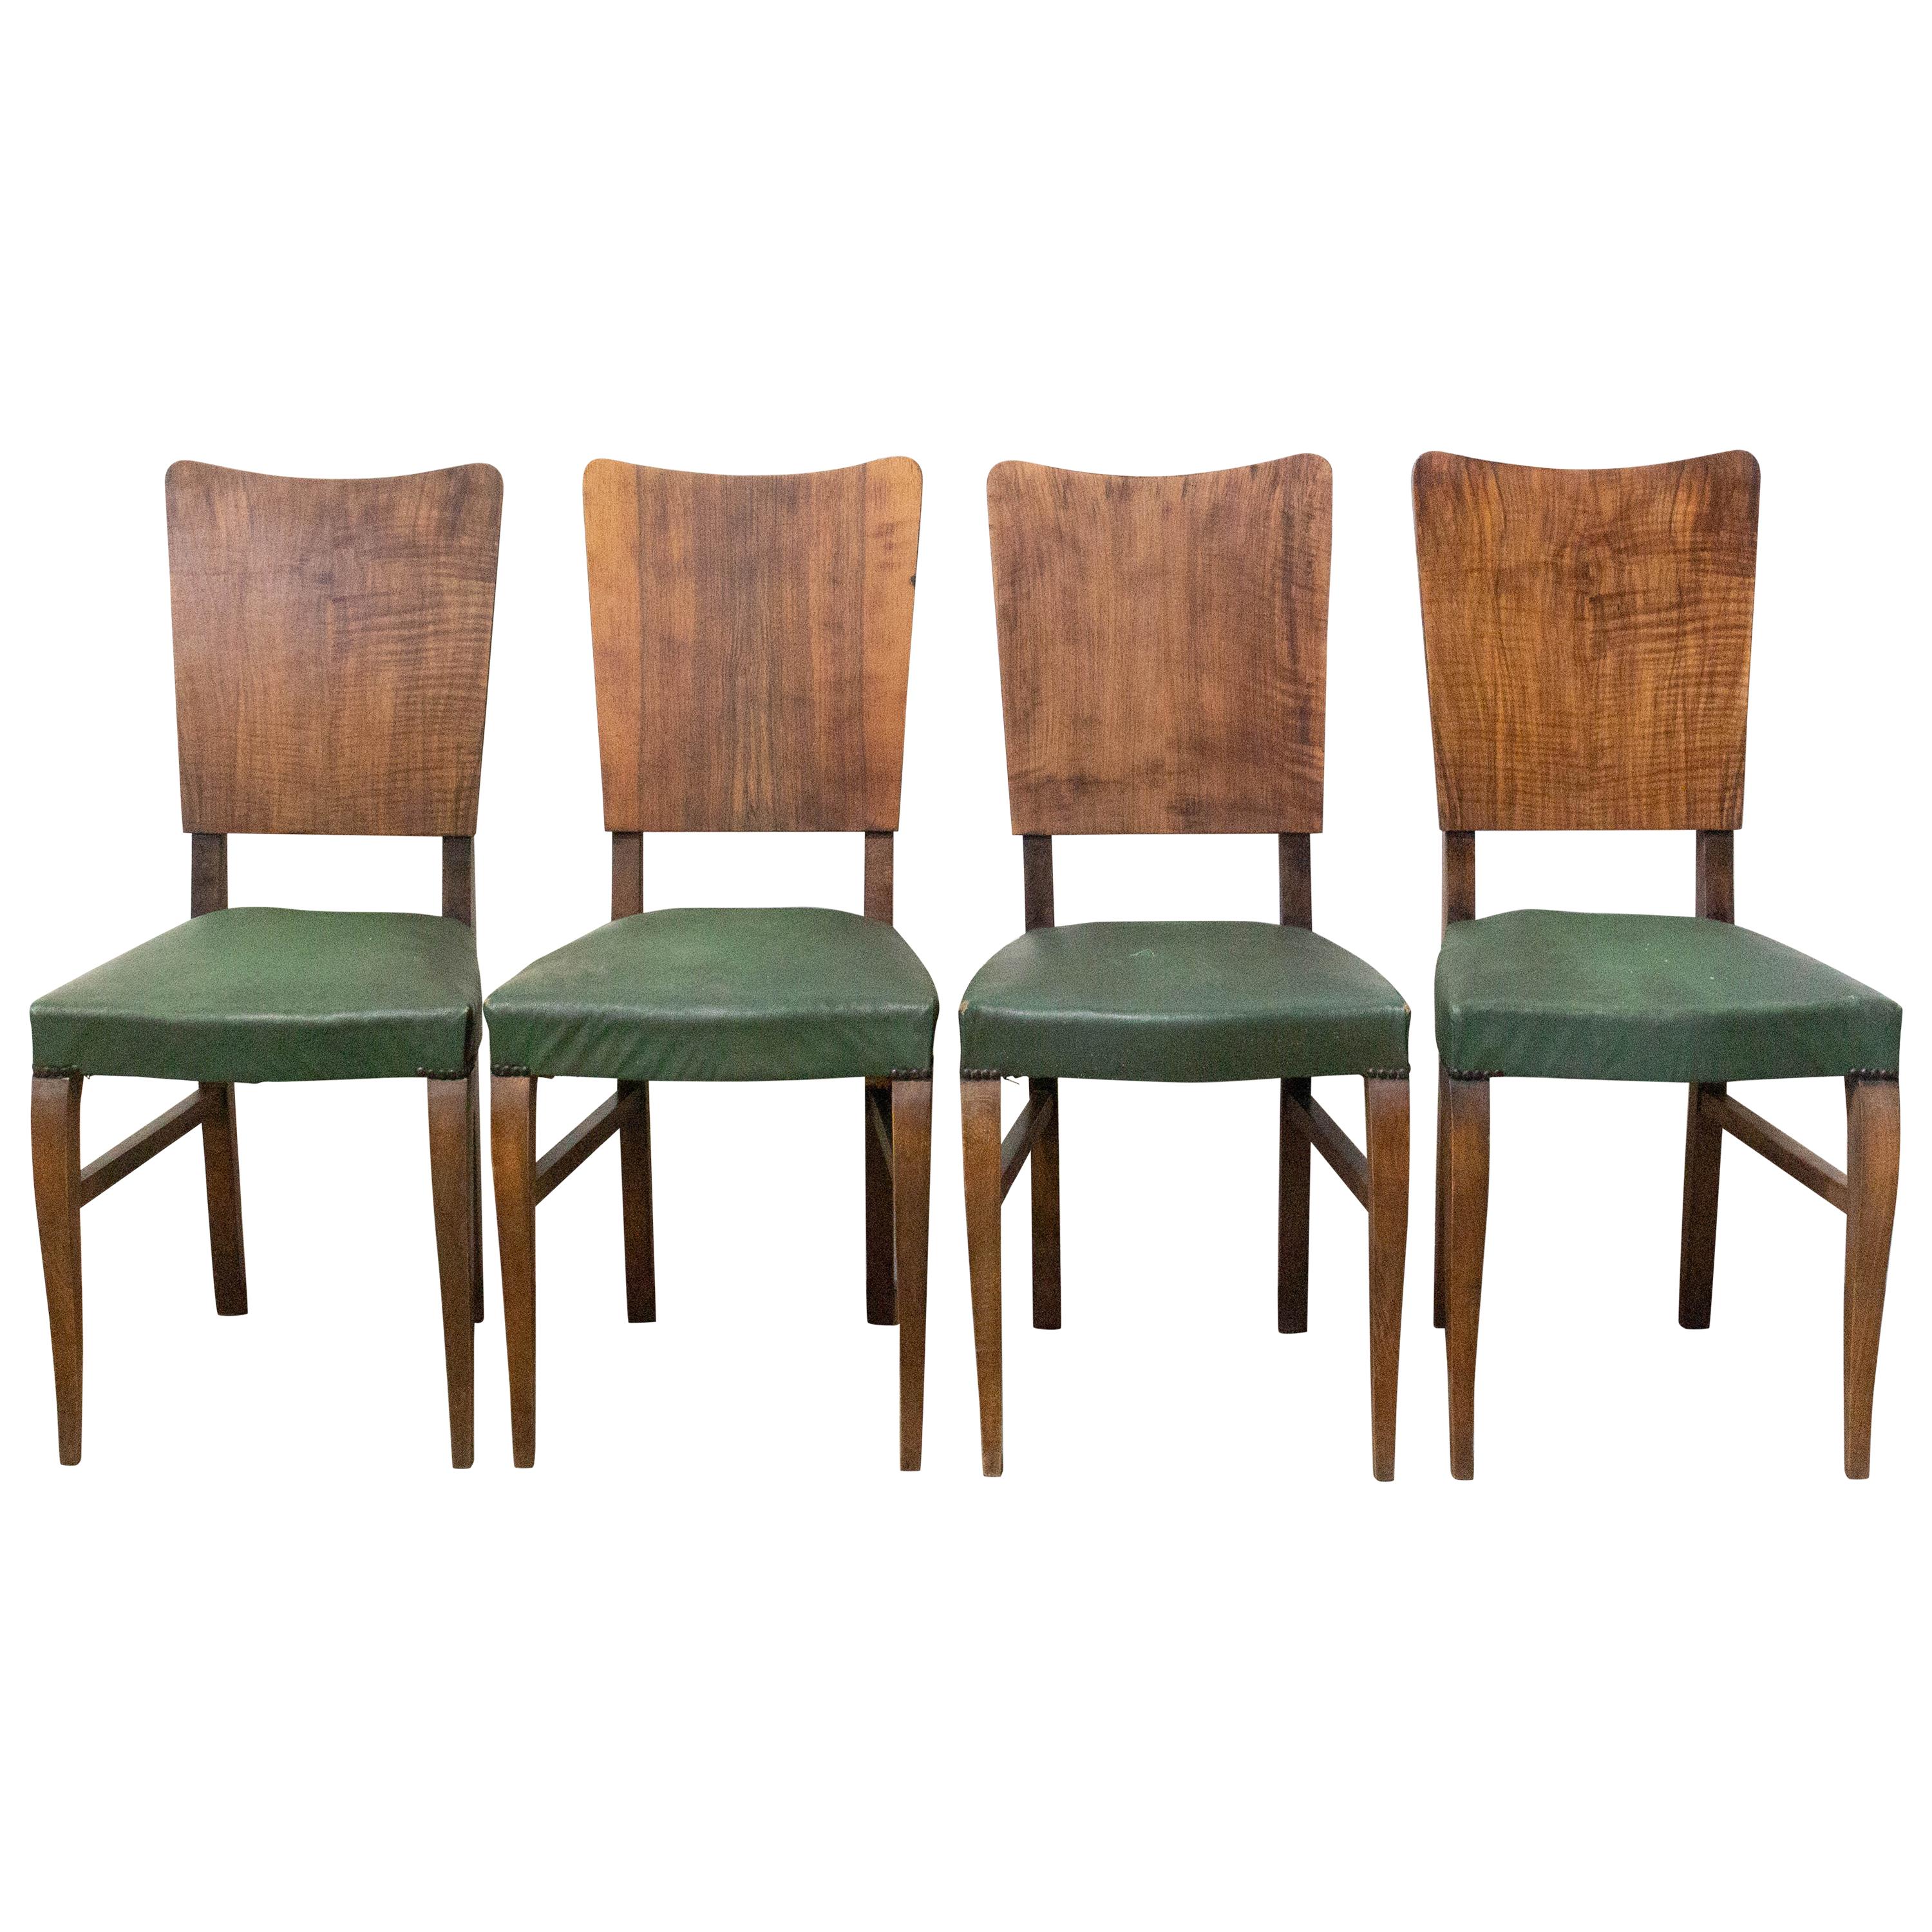 Four Vintage Dining Chairs to Be Re-Upholstered, French, circa 1950